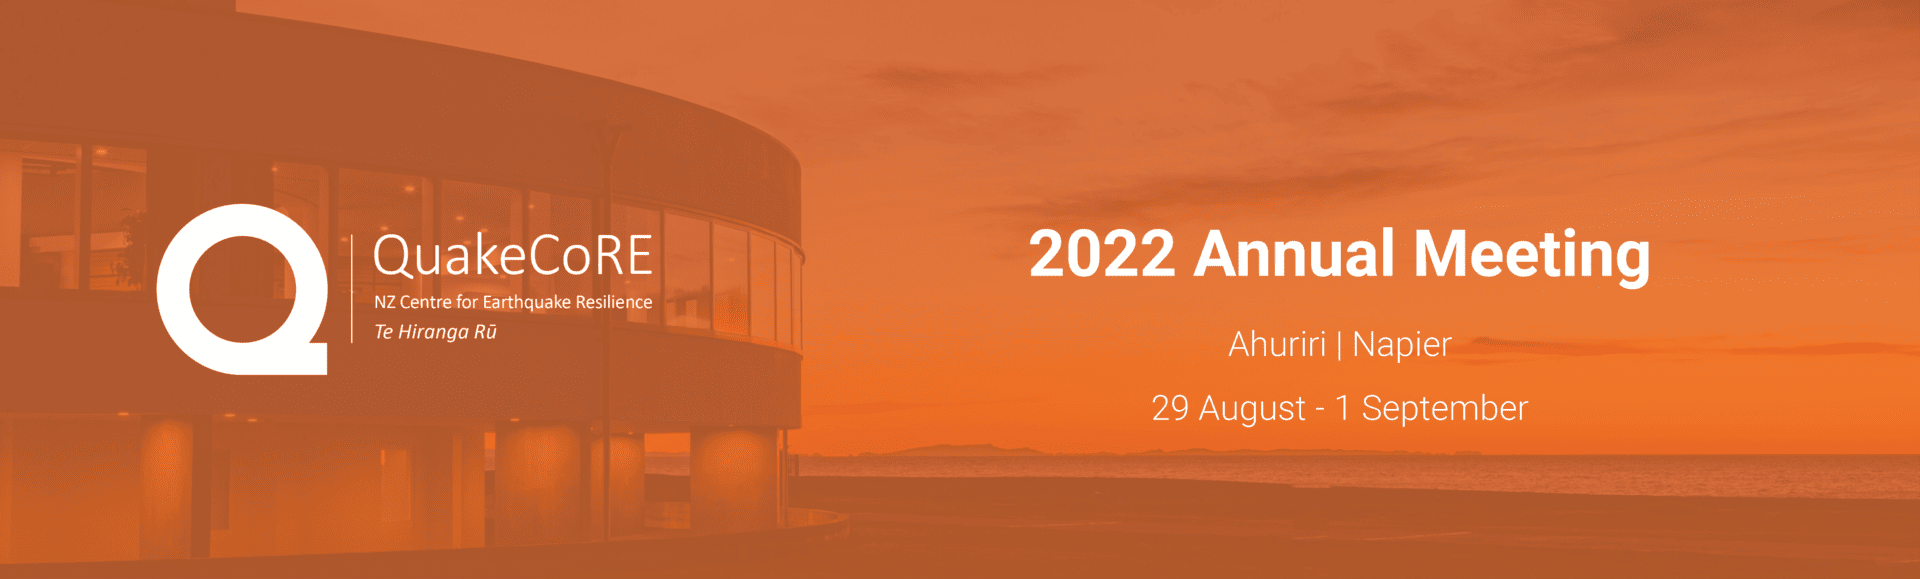 Te Hiranga Rū QuakeCoRE 2022 Annual Meeting - Ahuriri Napier - 29 August - 1 September written on an orange background with an image of the Meeting venue in behind